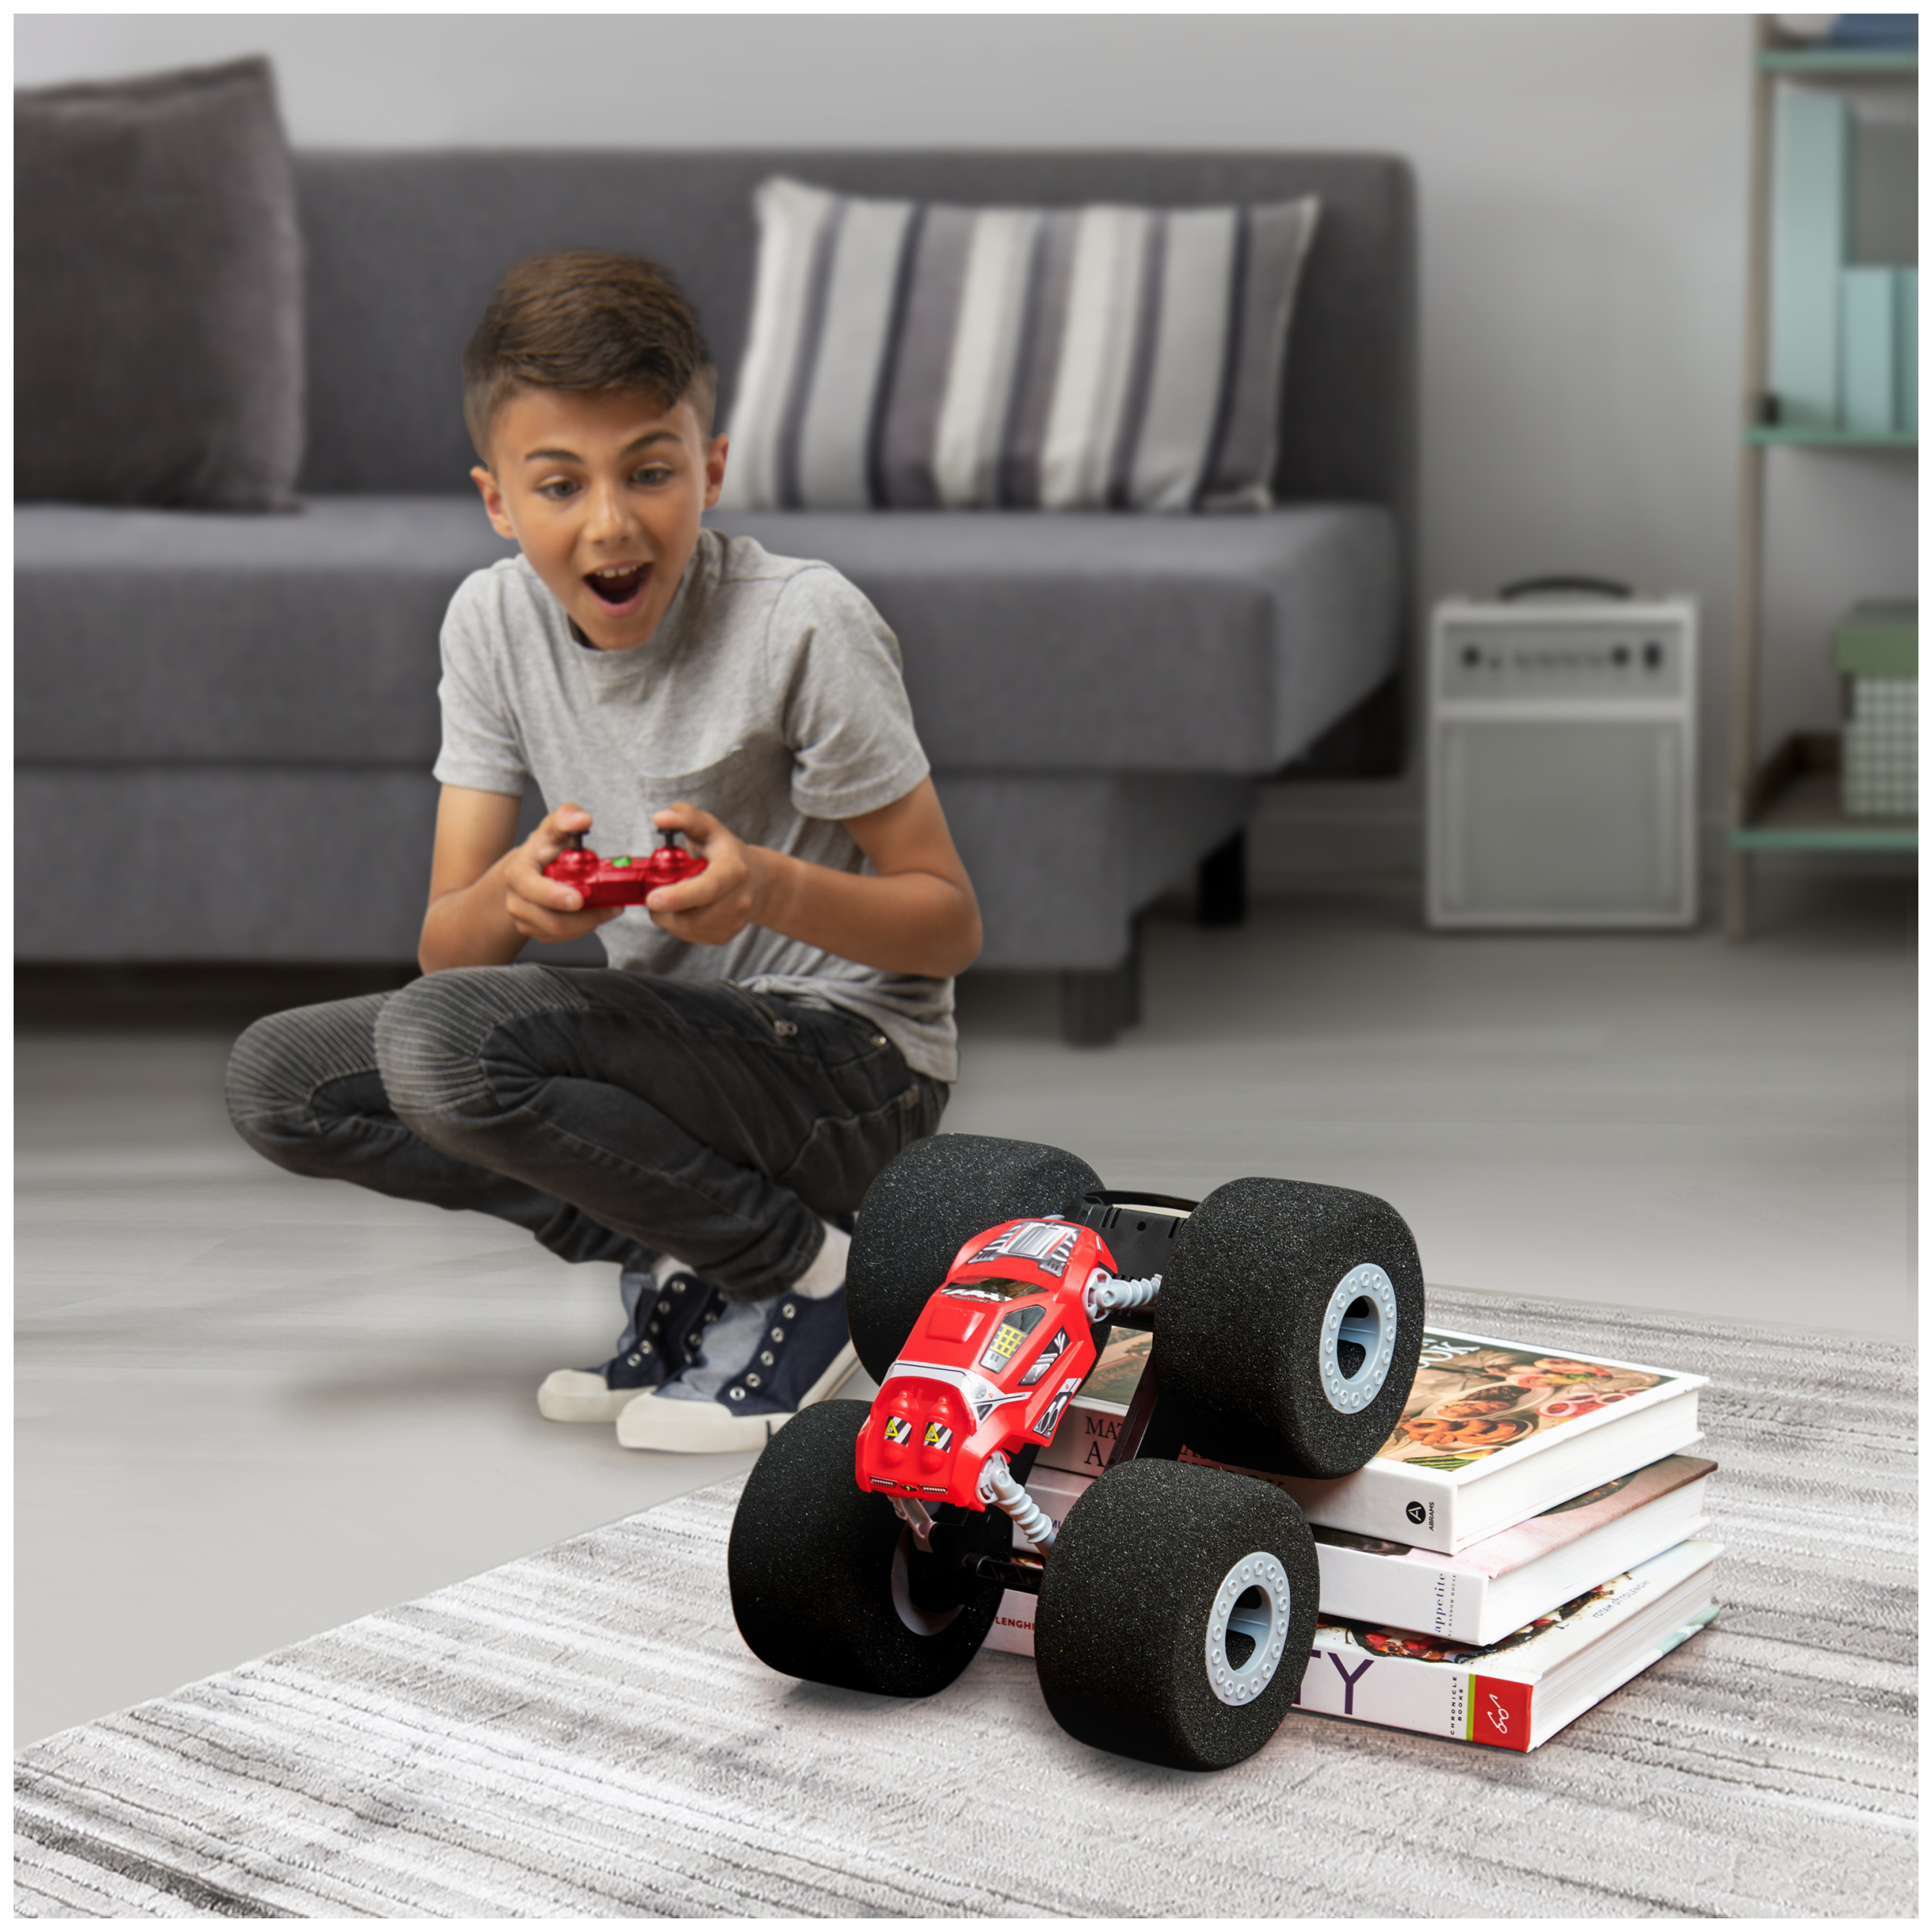 Air Hogs Super Soft, Stunt Shot Indoor Remote Control Stunt Vehicle with Soft Wheels, for Kids Aged 5 and up - image 4 of 10